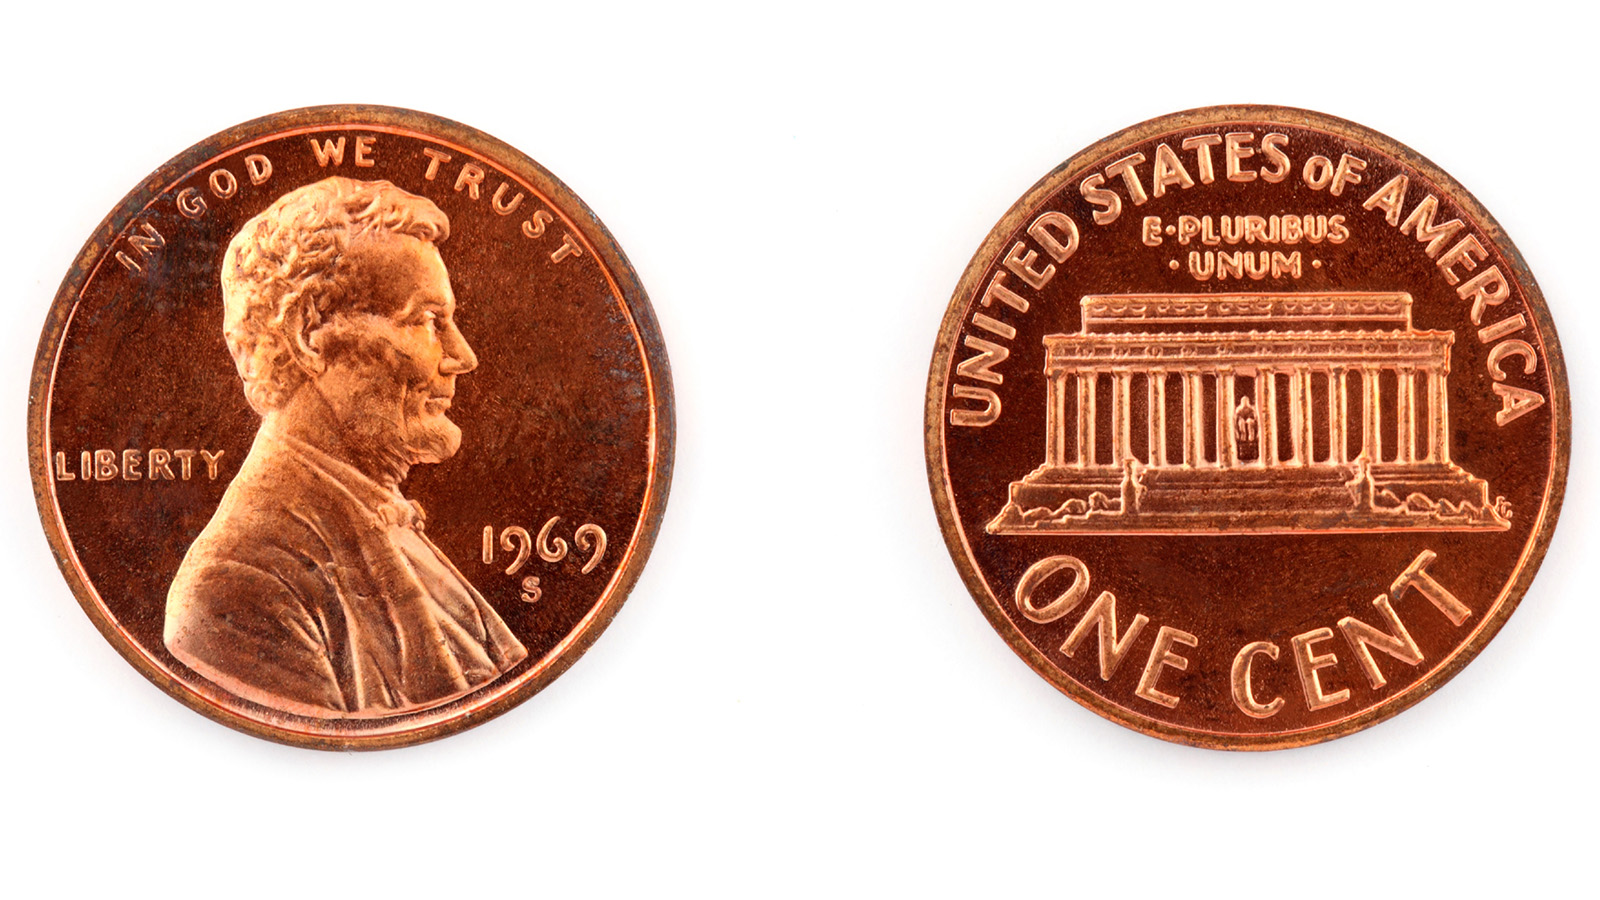 Example of Metallic Crystal copper plated penny